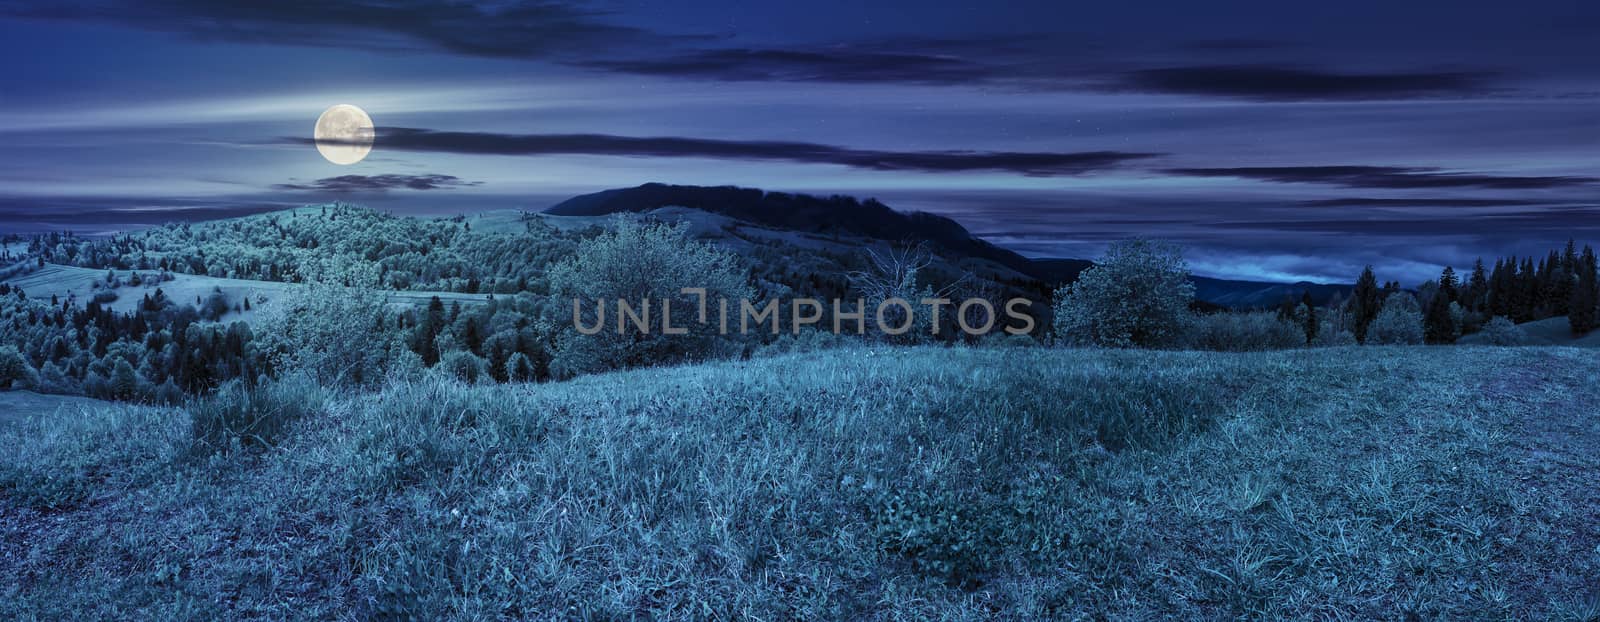 panoramic mountain landscape. green grass on meadow near mixed forest in mountains at night in full moon light